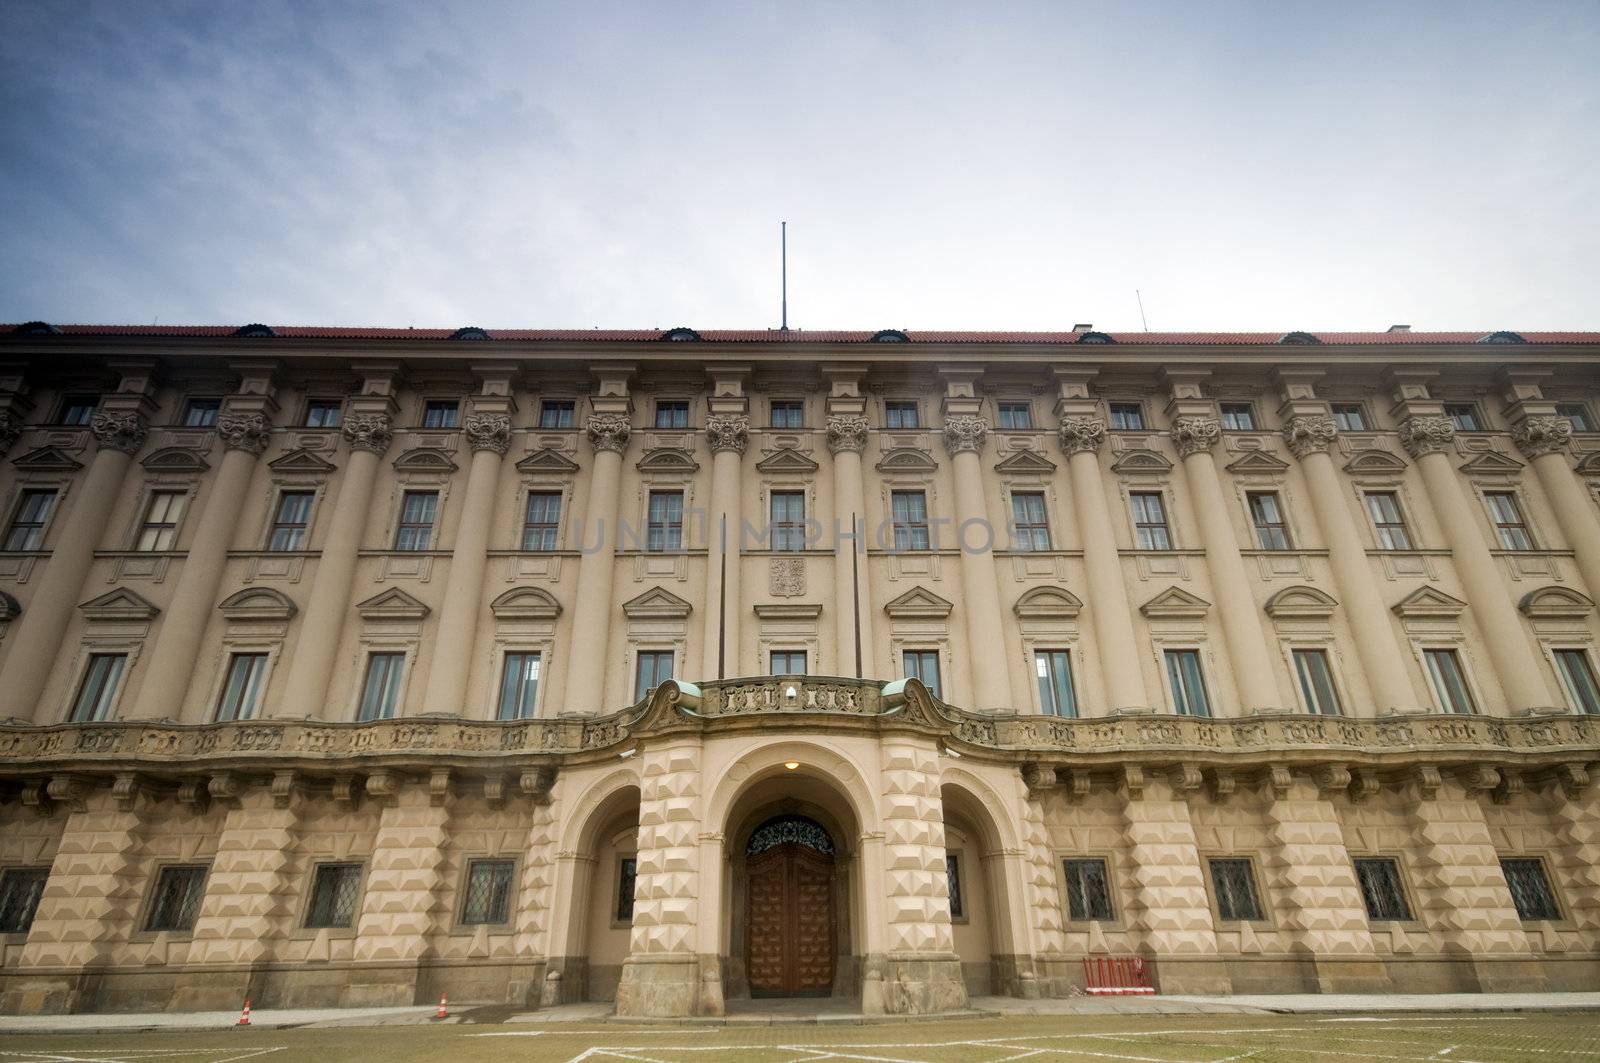 Cernin palace in Prague, Ministry of Foreign affairs